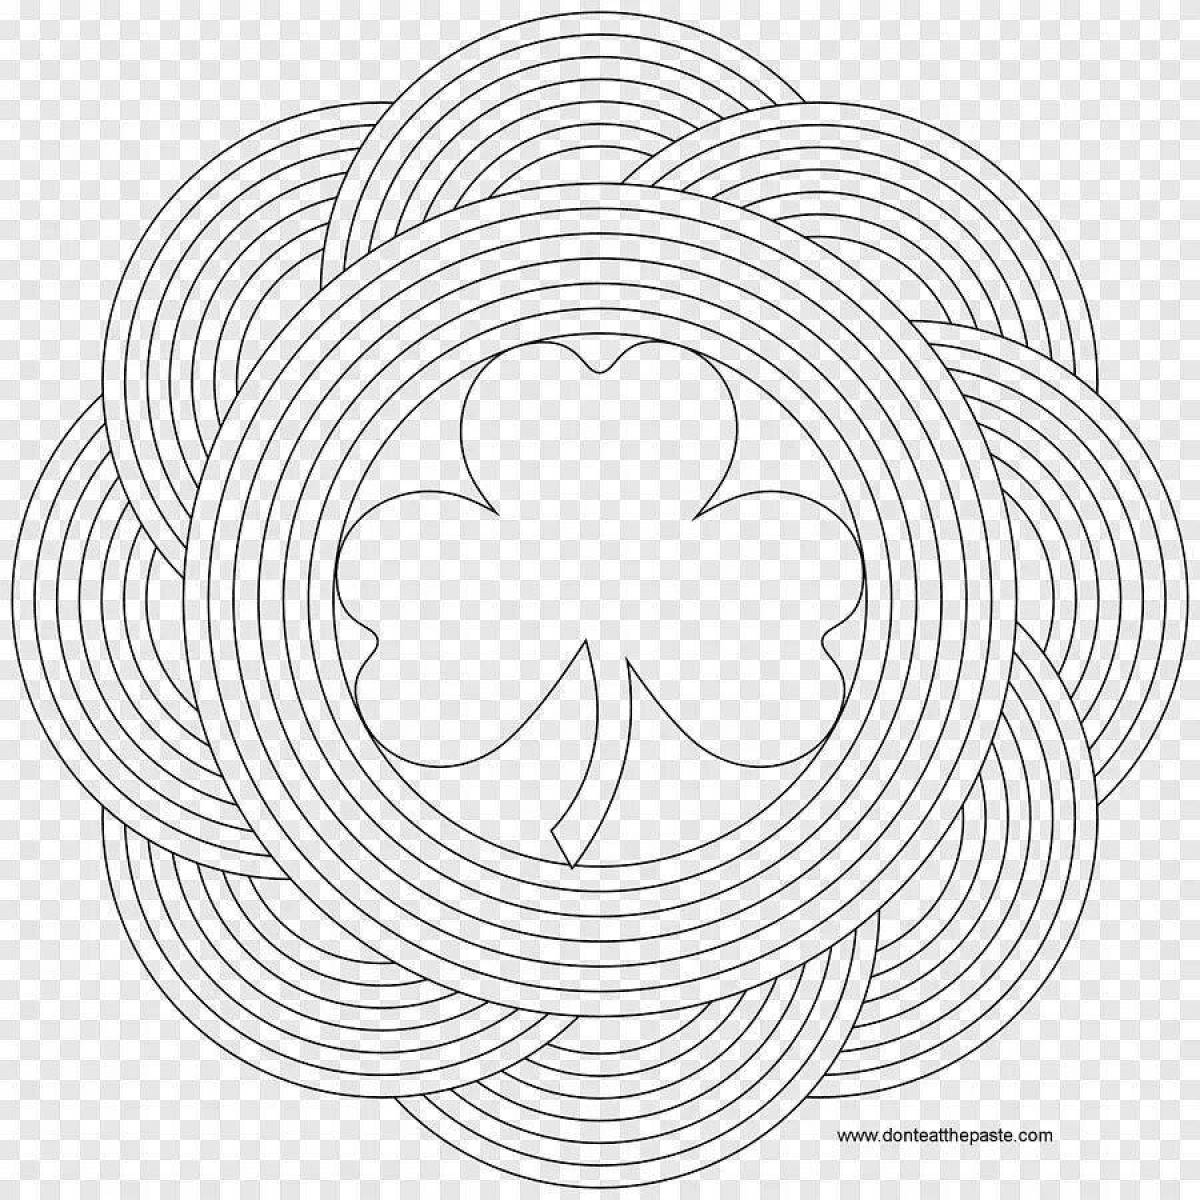 Fancy round lines coloring book